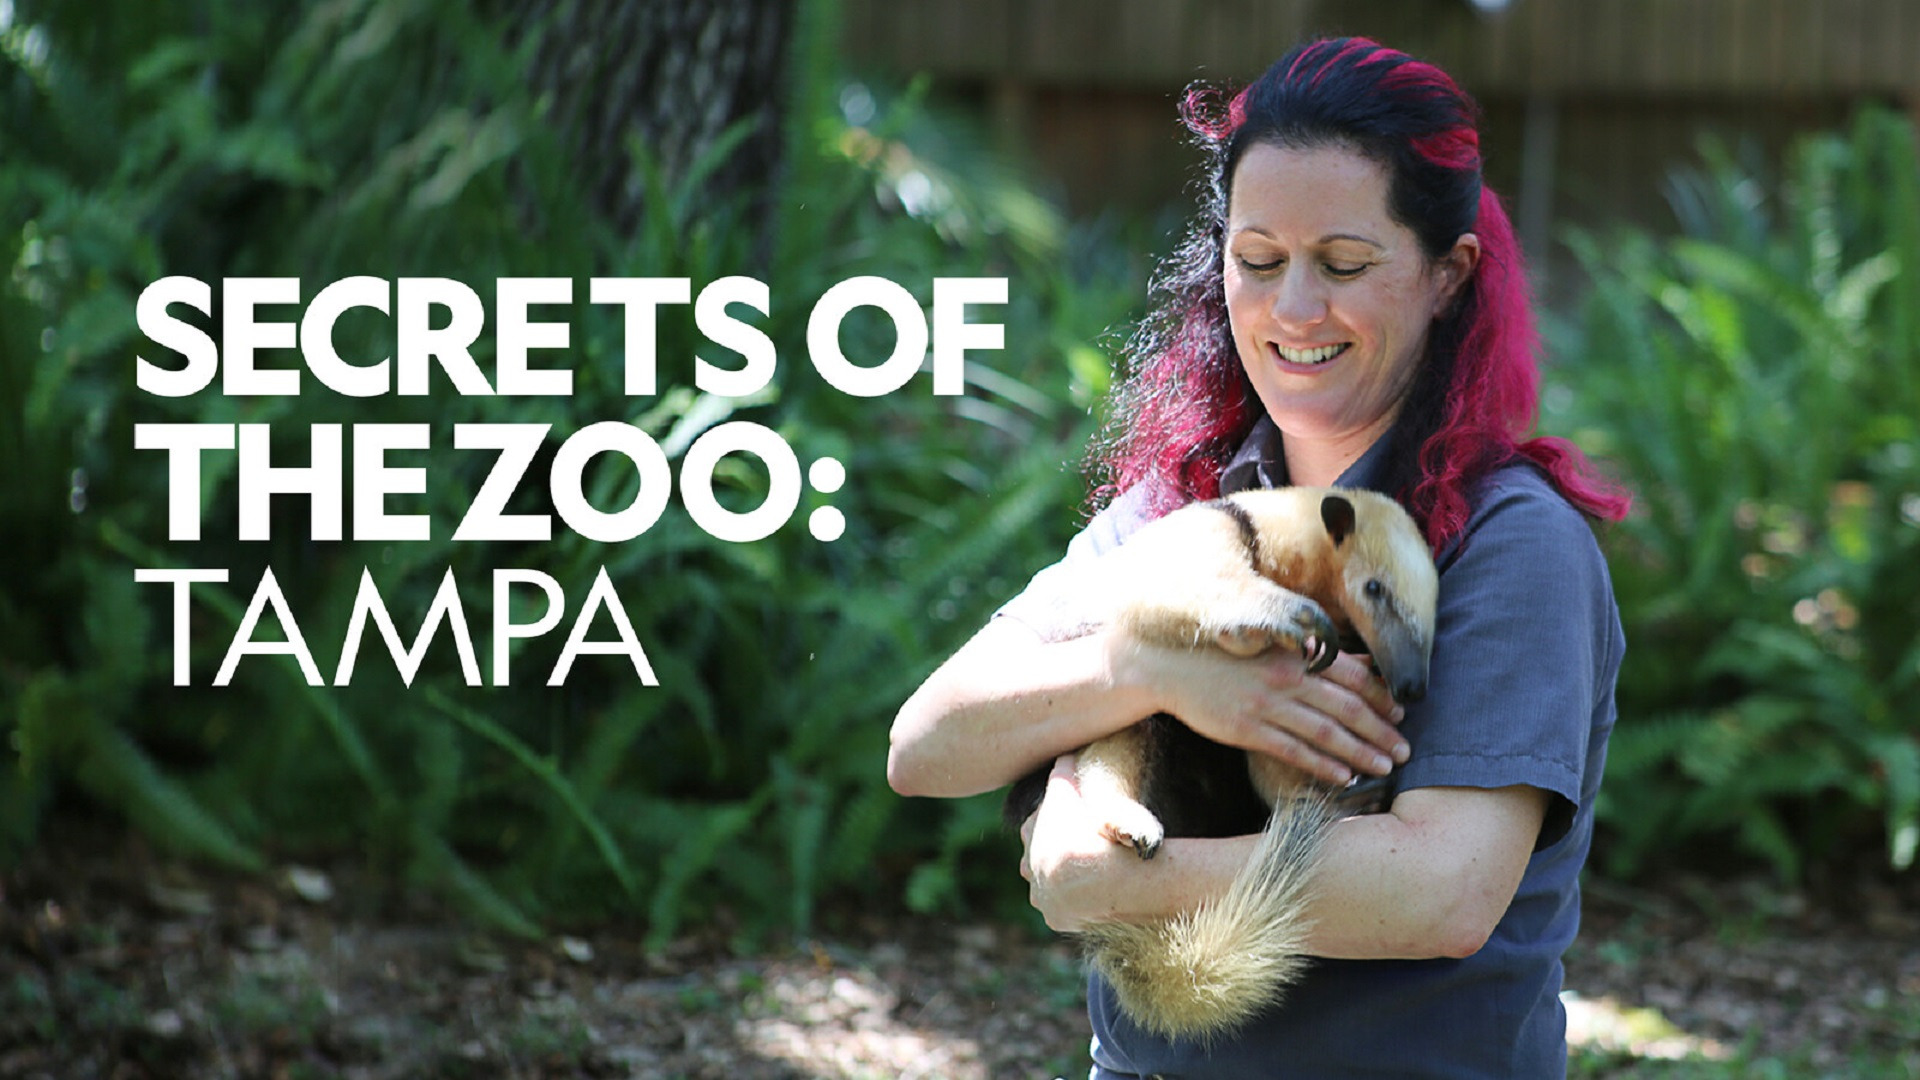 Show Secrets of the Zoo: Tampa